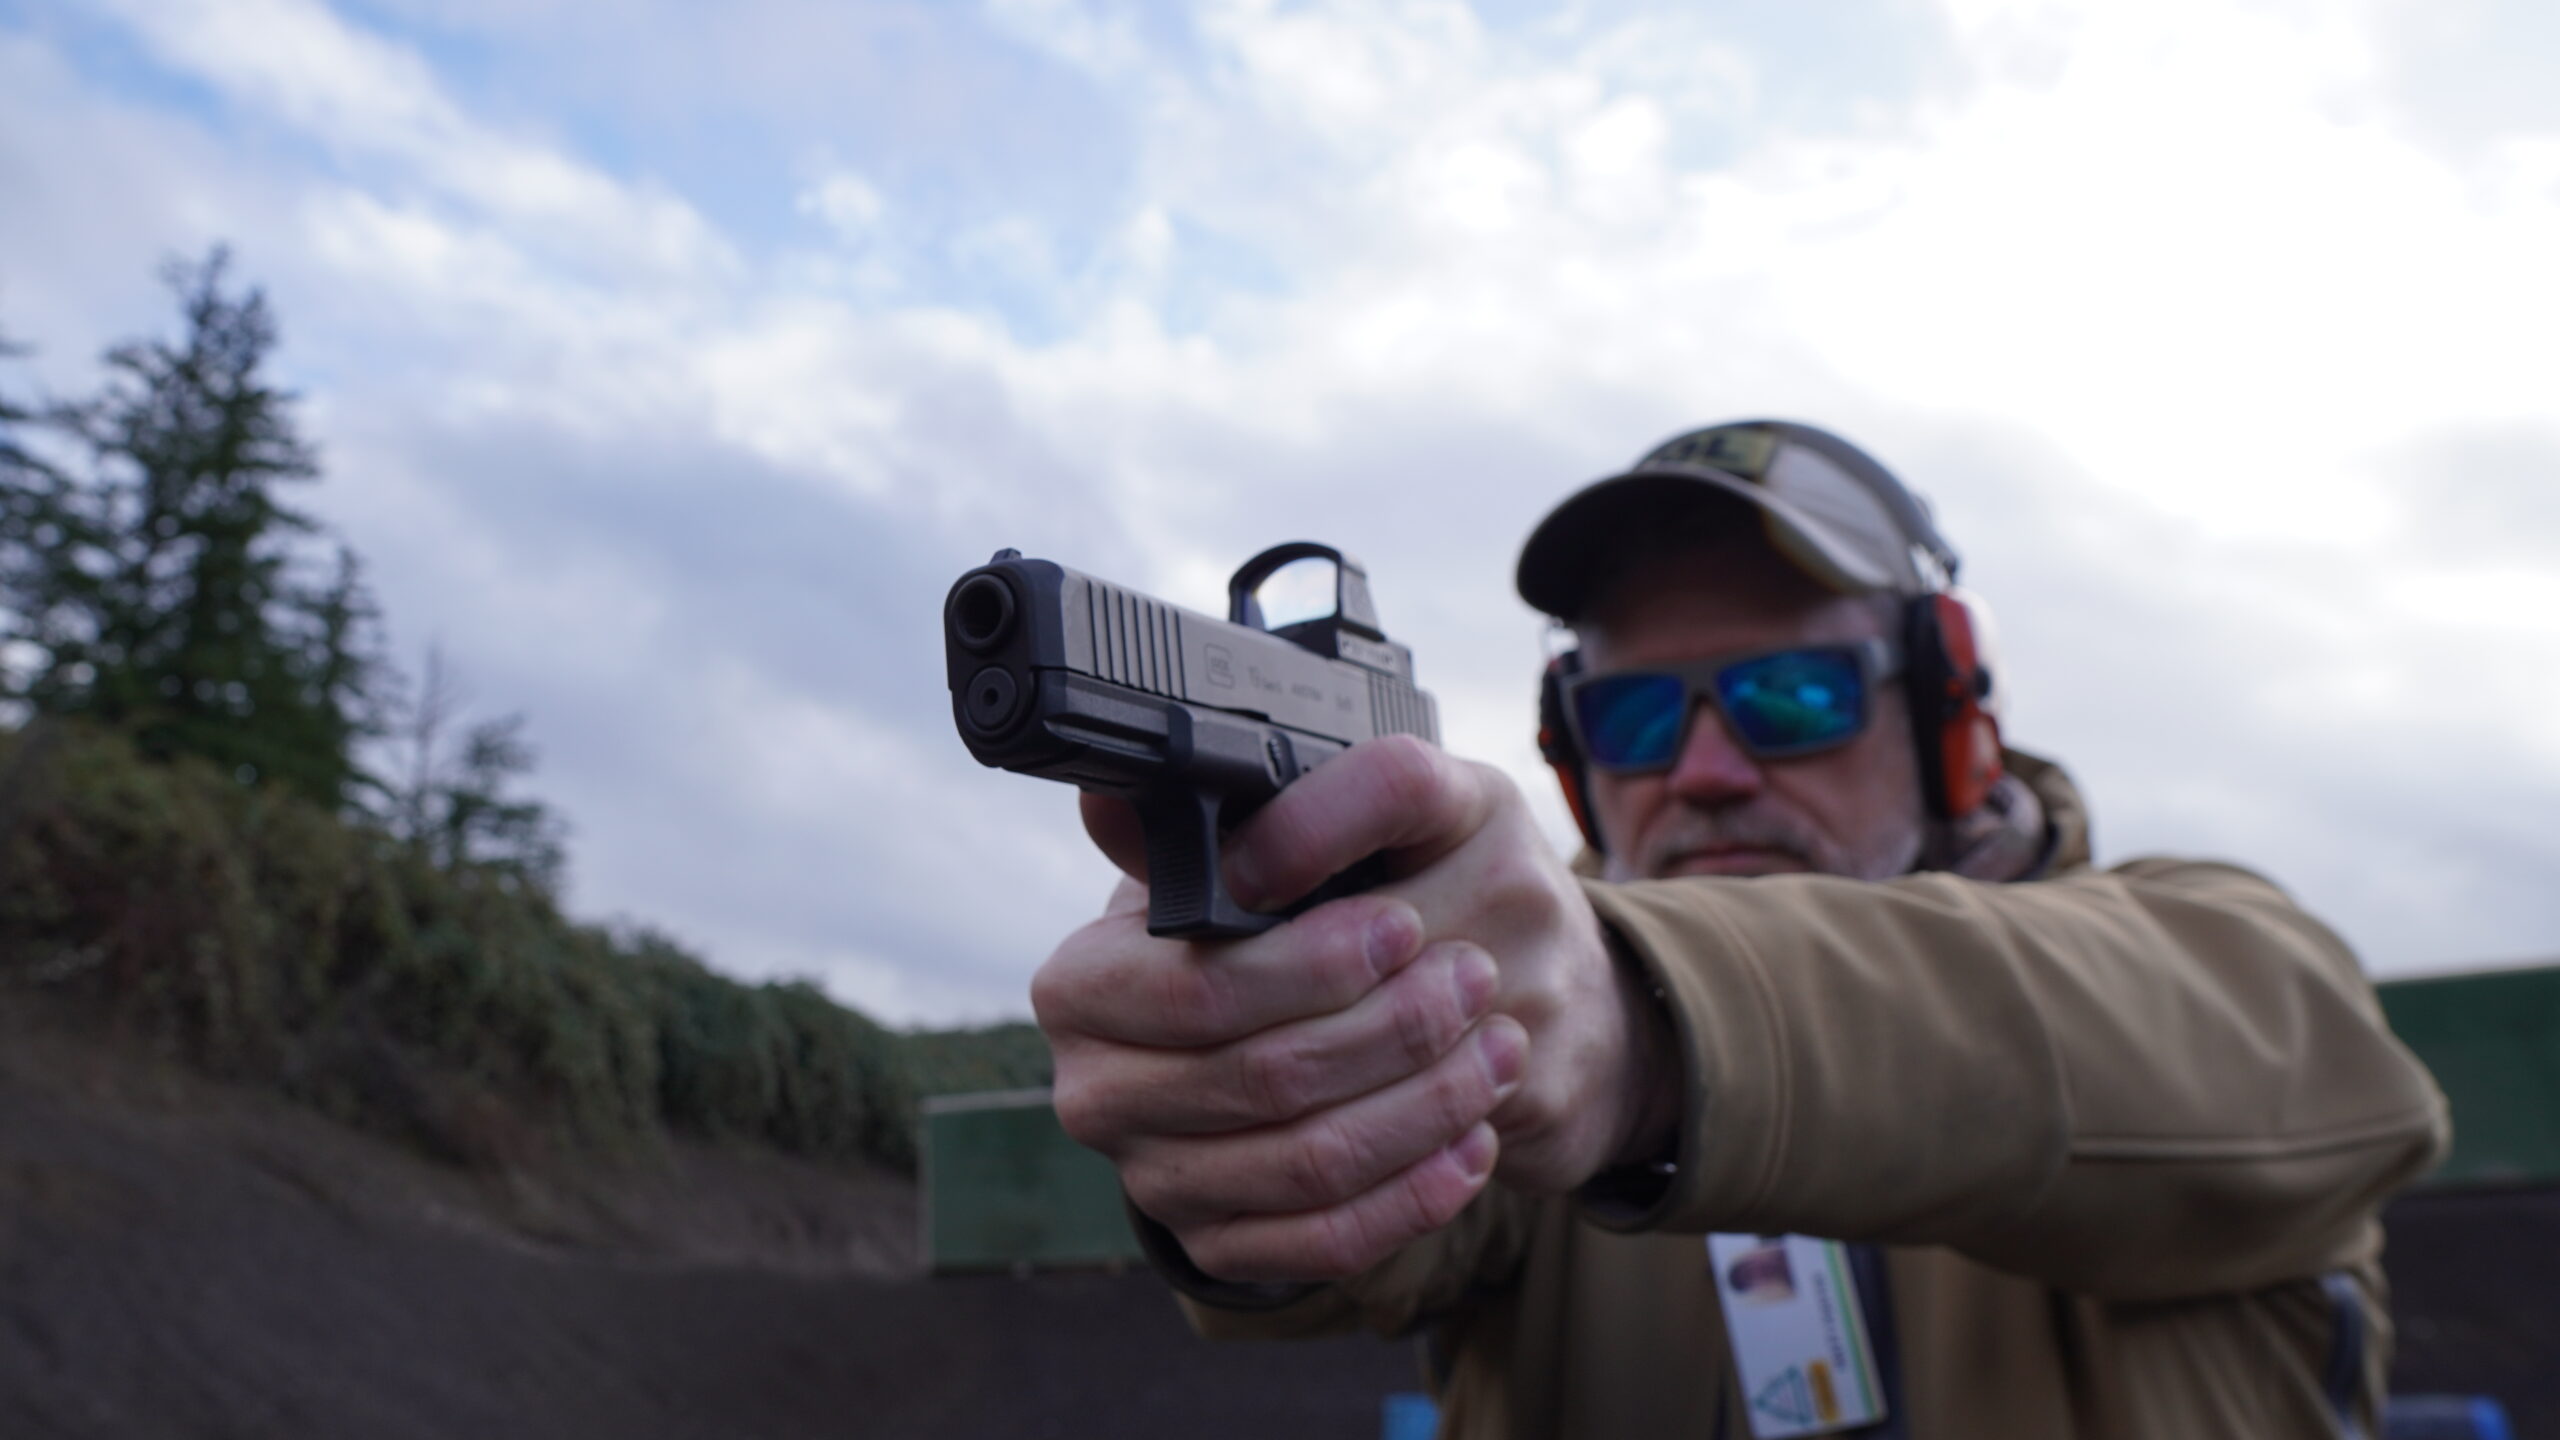 The author testing a Glock G19 MOS.